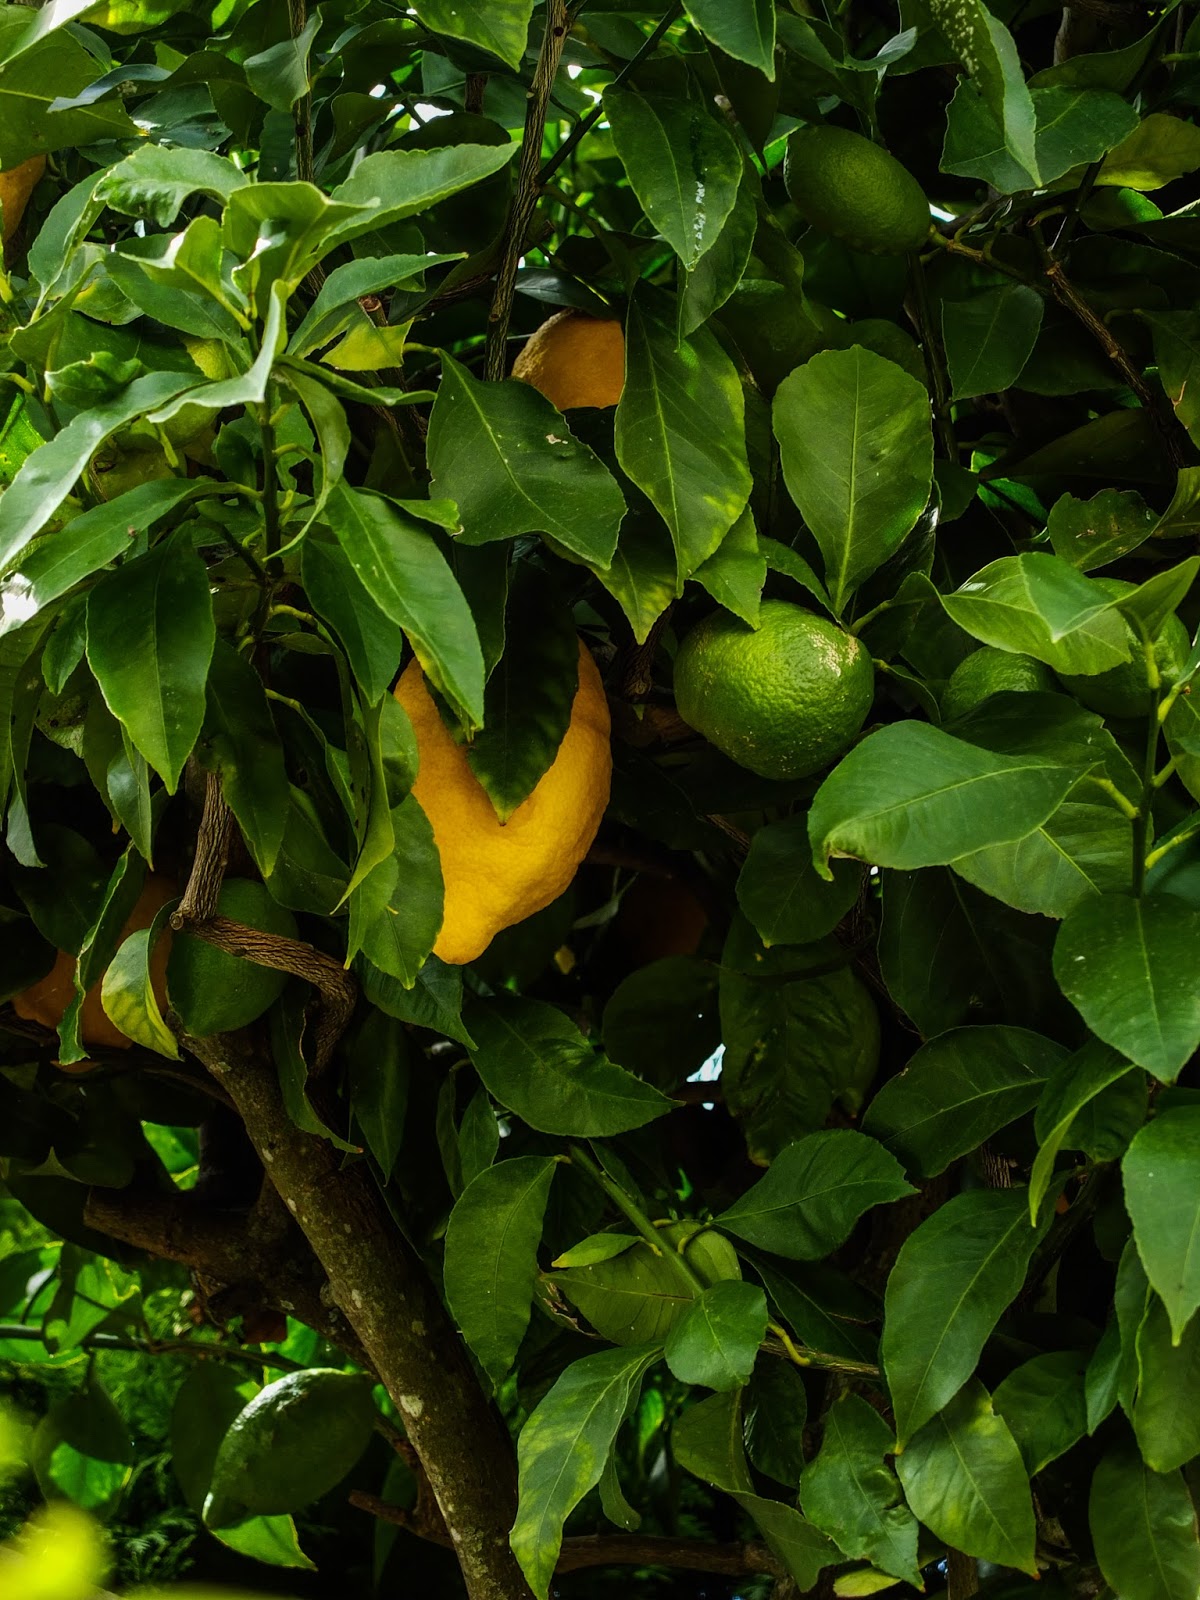 Yellow and green lemons hanging on a tree in Porto, Portugal.